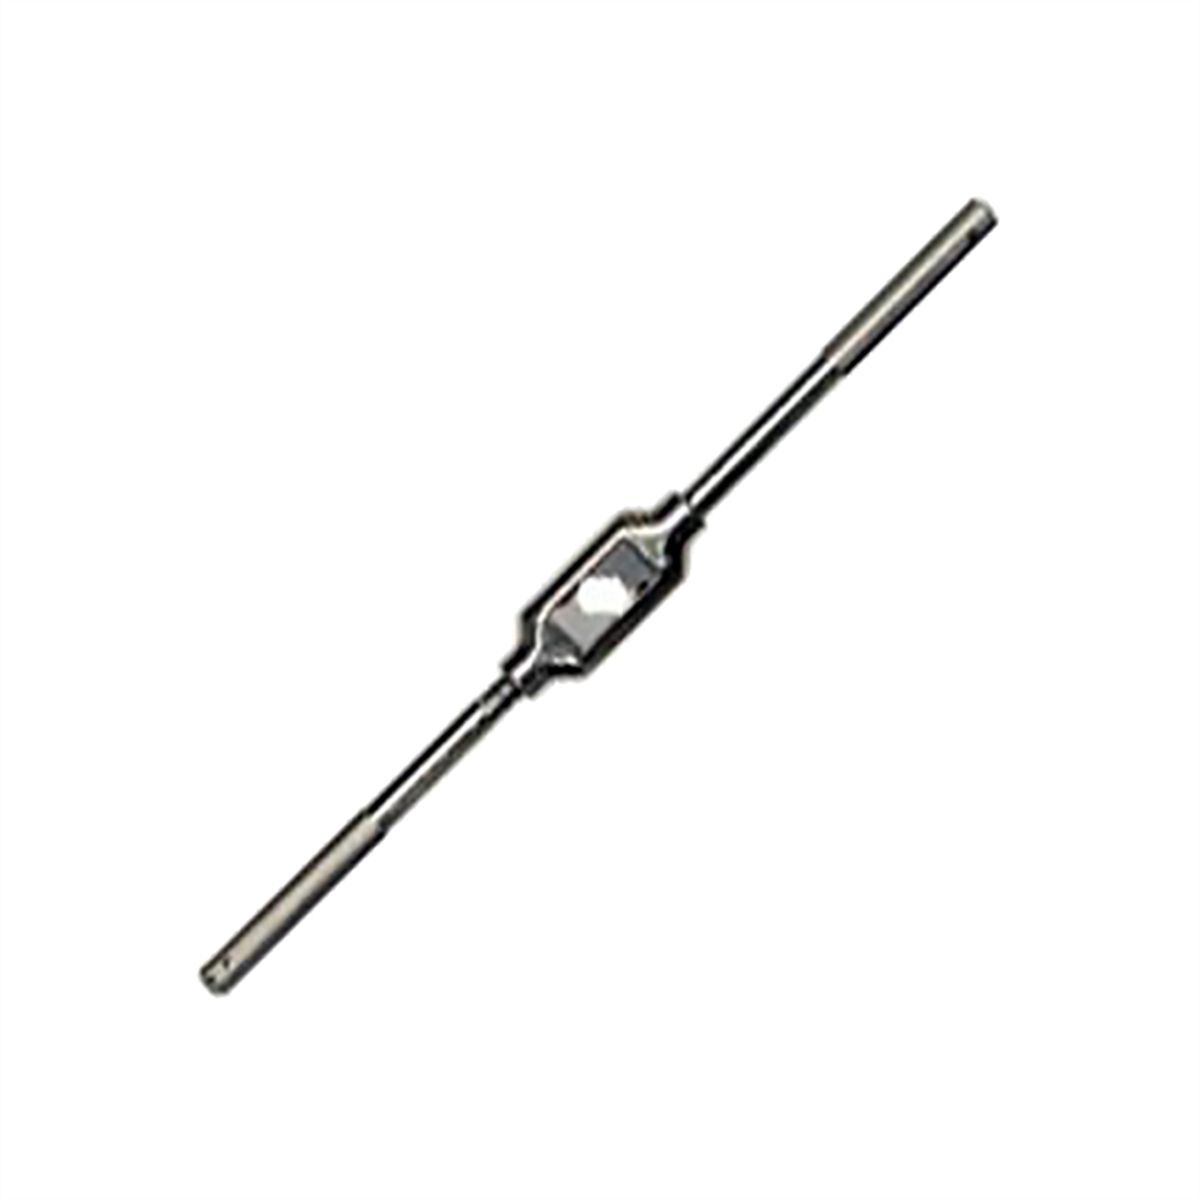 TR - 88 For Taps No. 0 to 1/2" (3mm to 12mm)